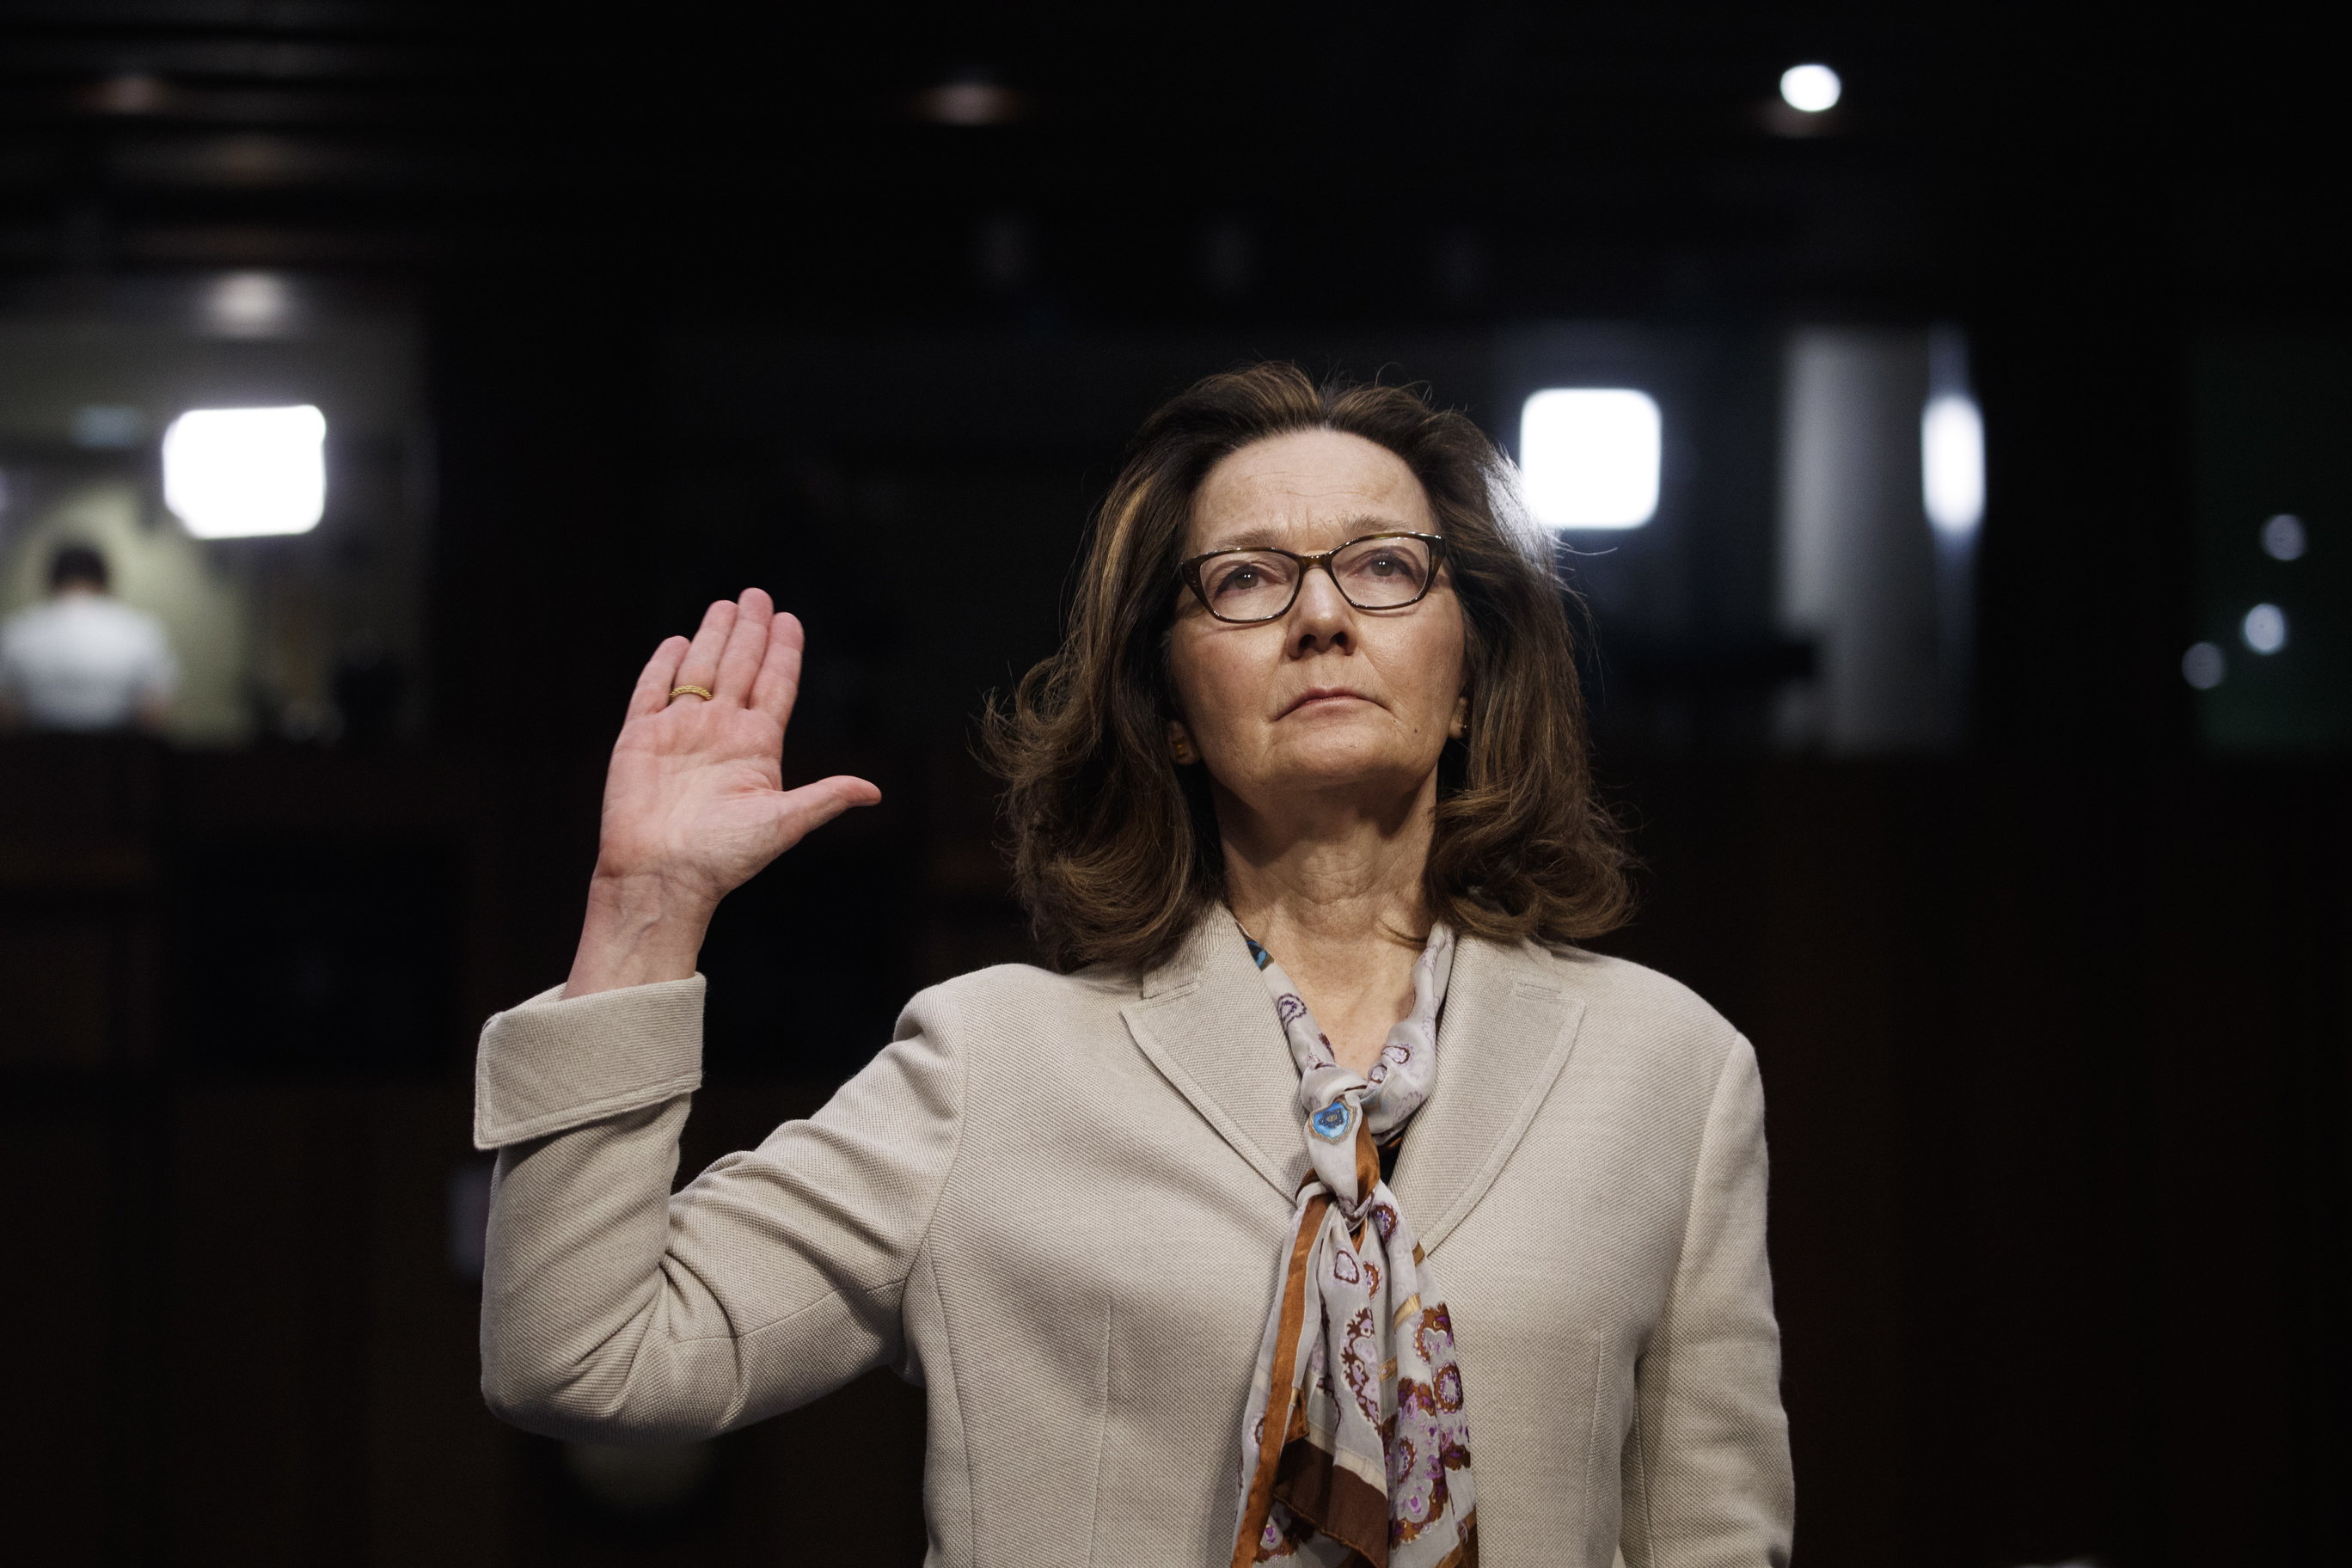 epa06745691 (FILE) - CIA Director nominee Gina Haspel is sworn in prior to testifying during her Senate Select Intelligence Committee confirmation hearing in Washington, DC, USA, 09 May 2018  (issued 17 May 2018). Gina Hapel has been confirmed by the US Senate to be the first woman to lead the Central Intelligence Agency (CIA).  EPA/SHAWN THEW